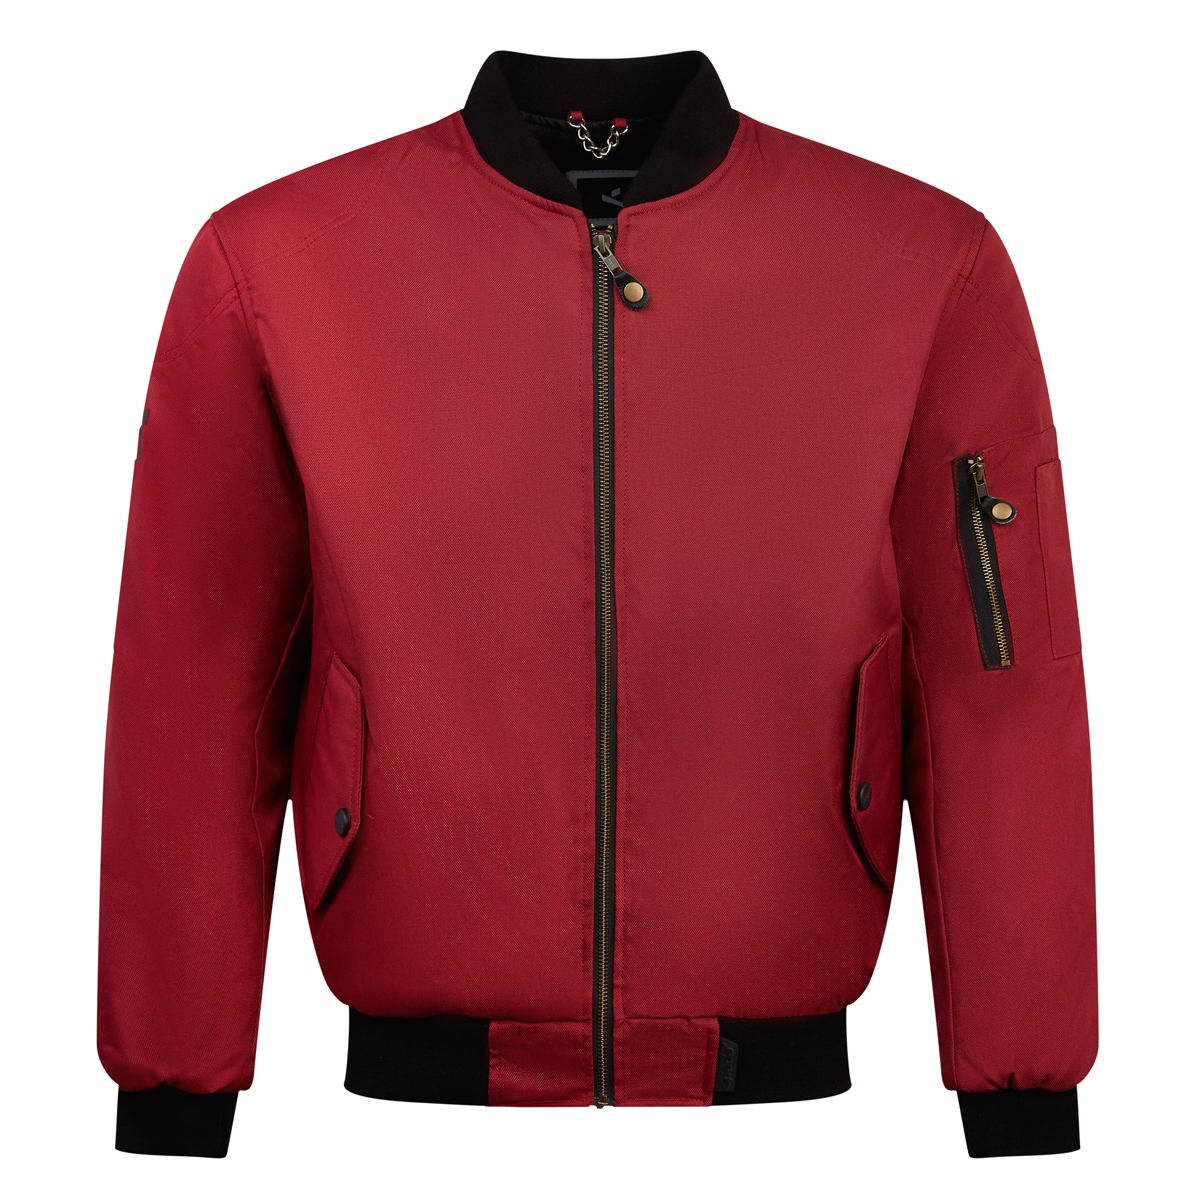 Spada Air Force 1 CE Jacket, Red – Chas Mann Motorcycles